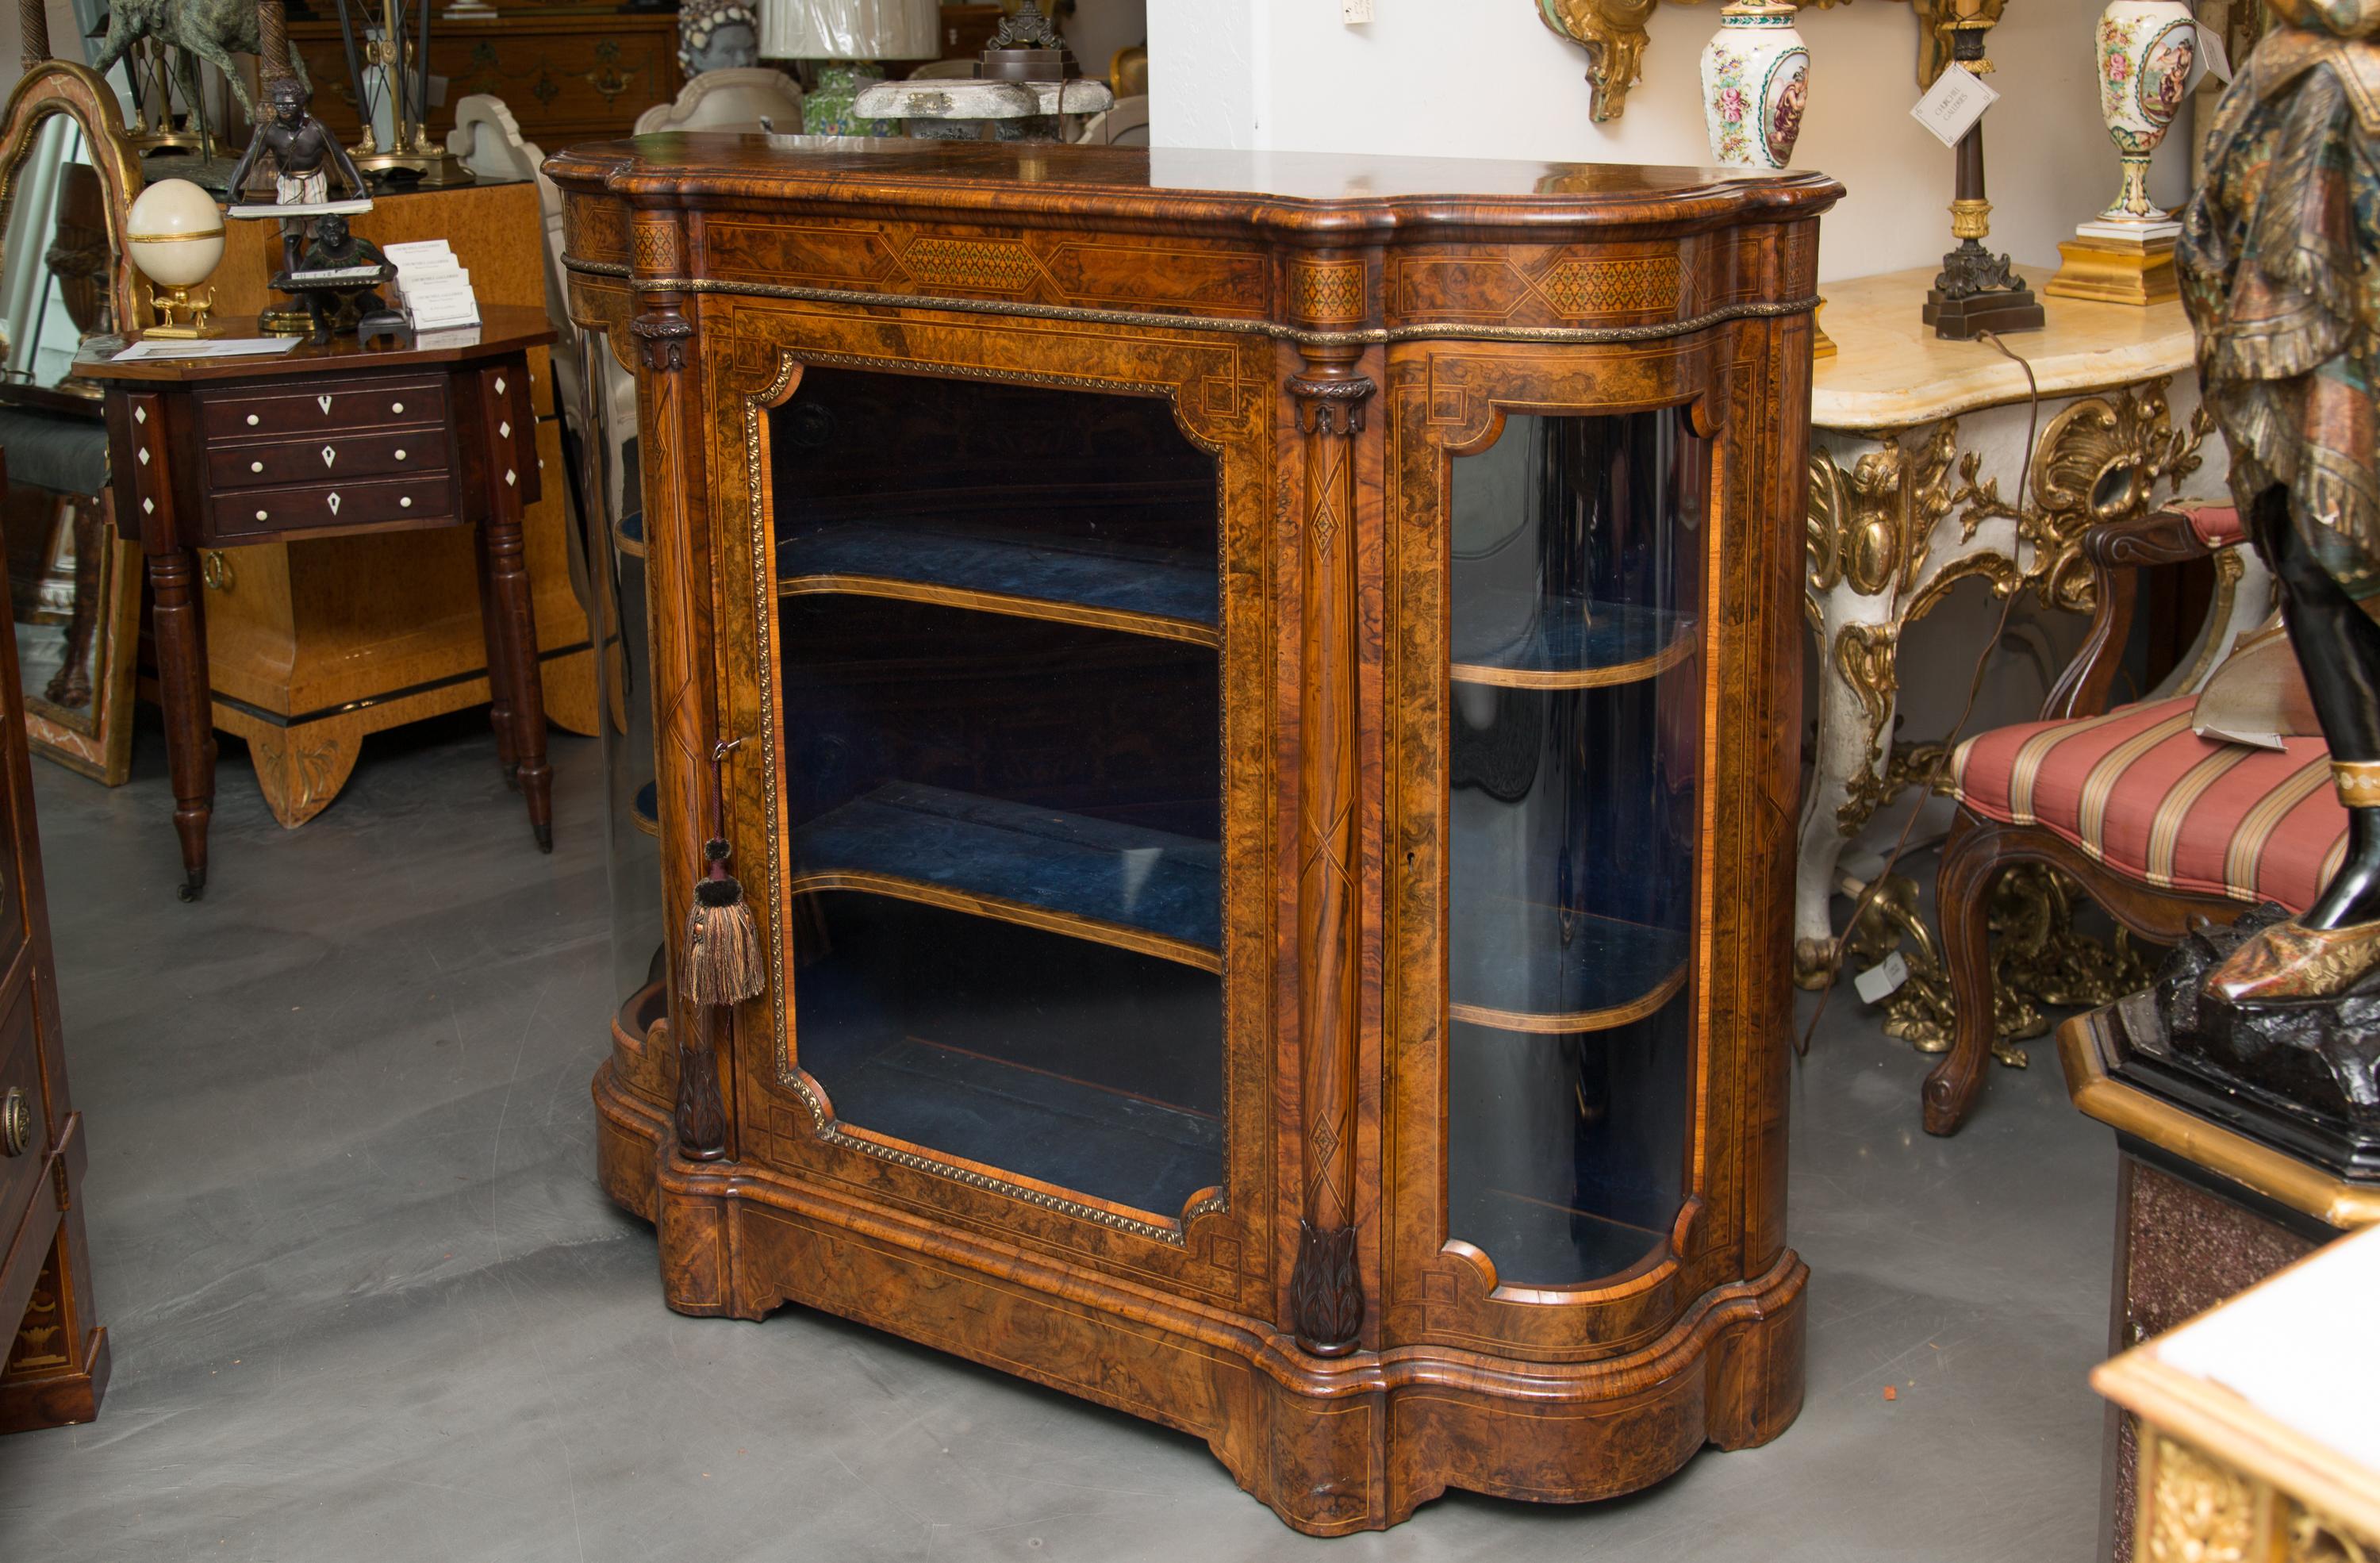 This is an exquisite walnut root and burl wood display cabinet with exceptional inlay work, 19th century.